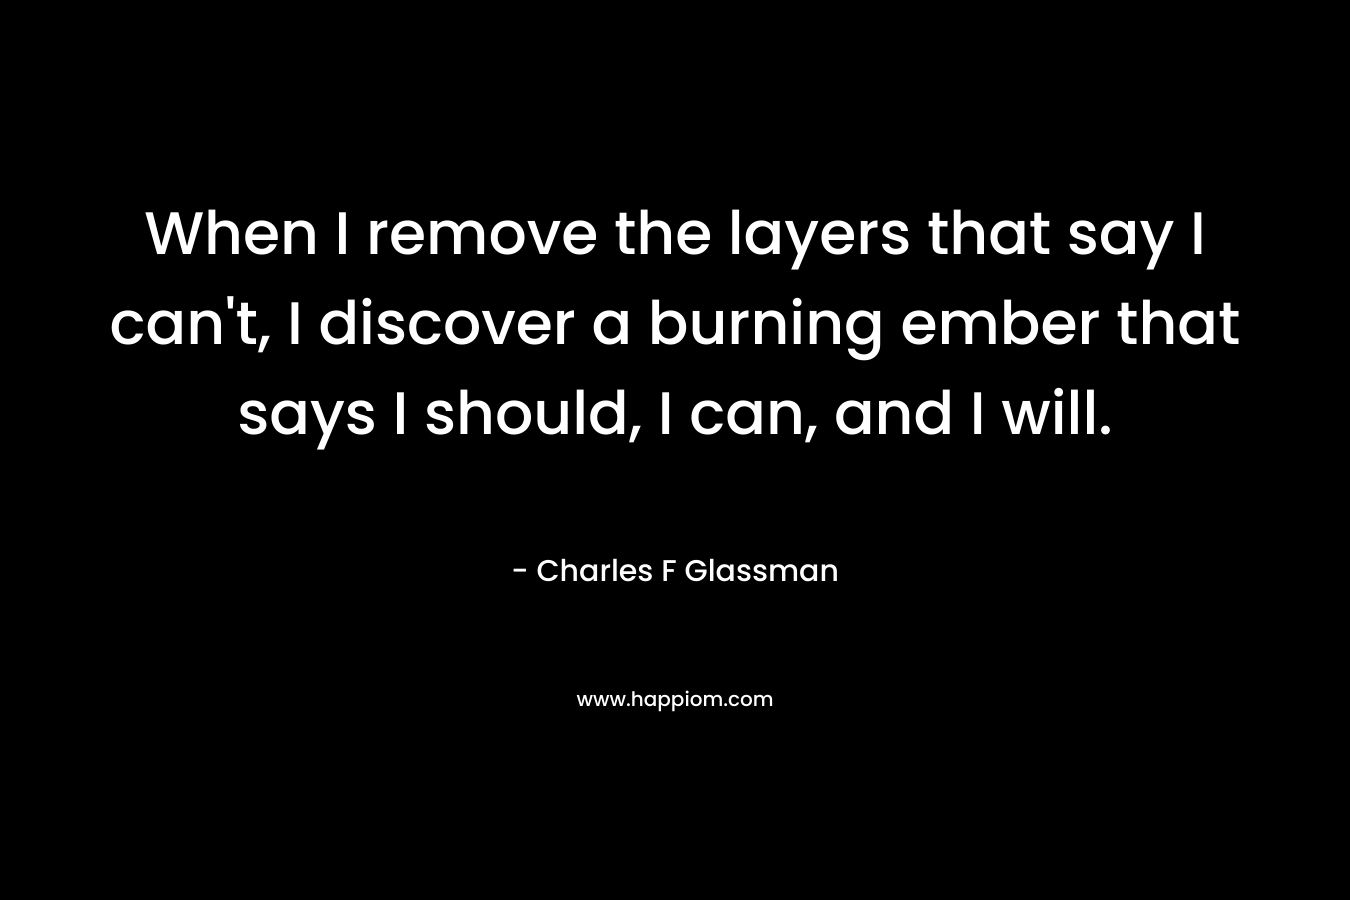 When I remove the layers that say I can't, I discover a burning ember that says I should, I can, and I will.